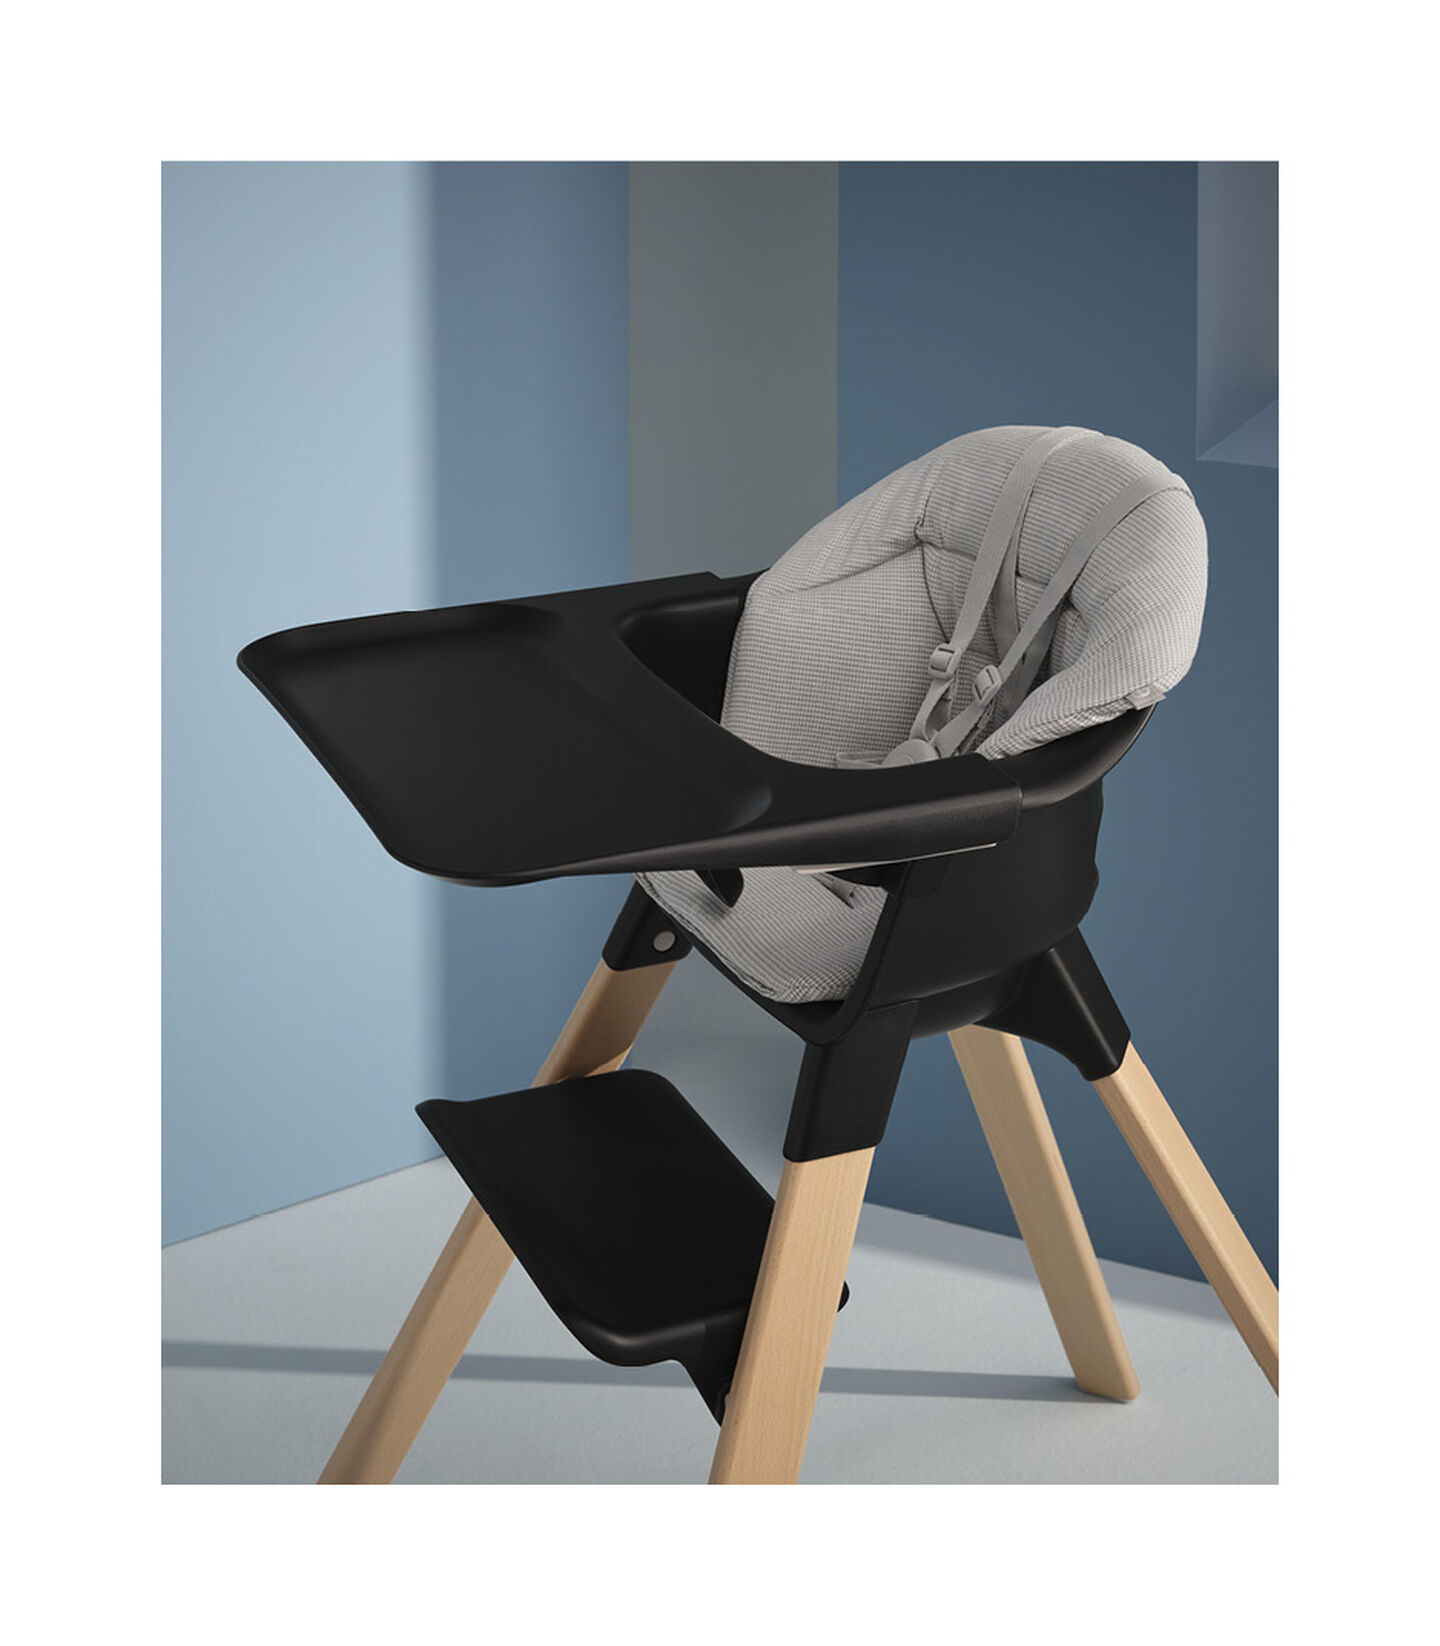 Stokke® Clikk™ High Chair Black with Natural Beech legs, and Nordic Grey cushion. Styled. view 2